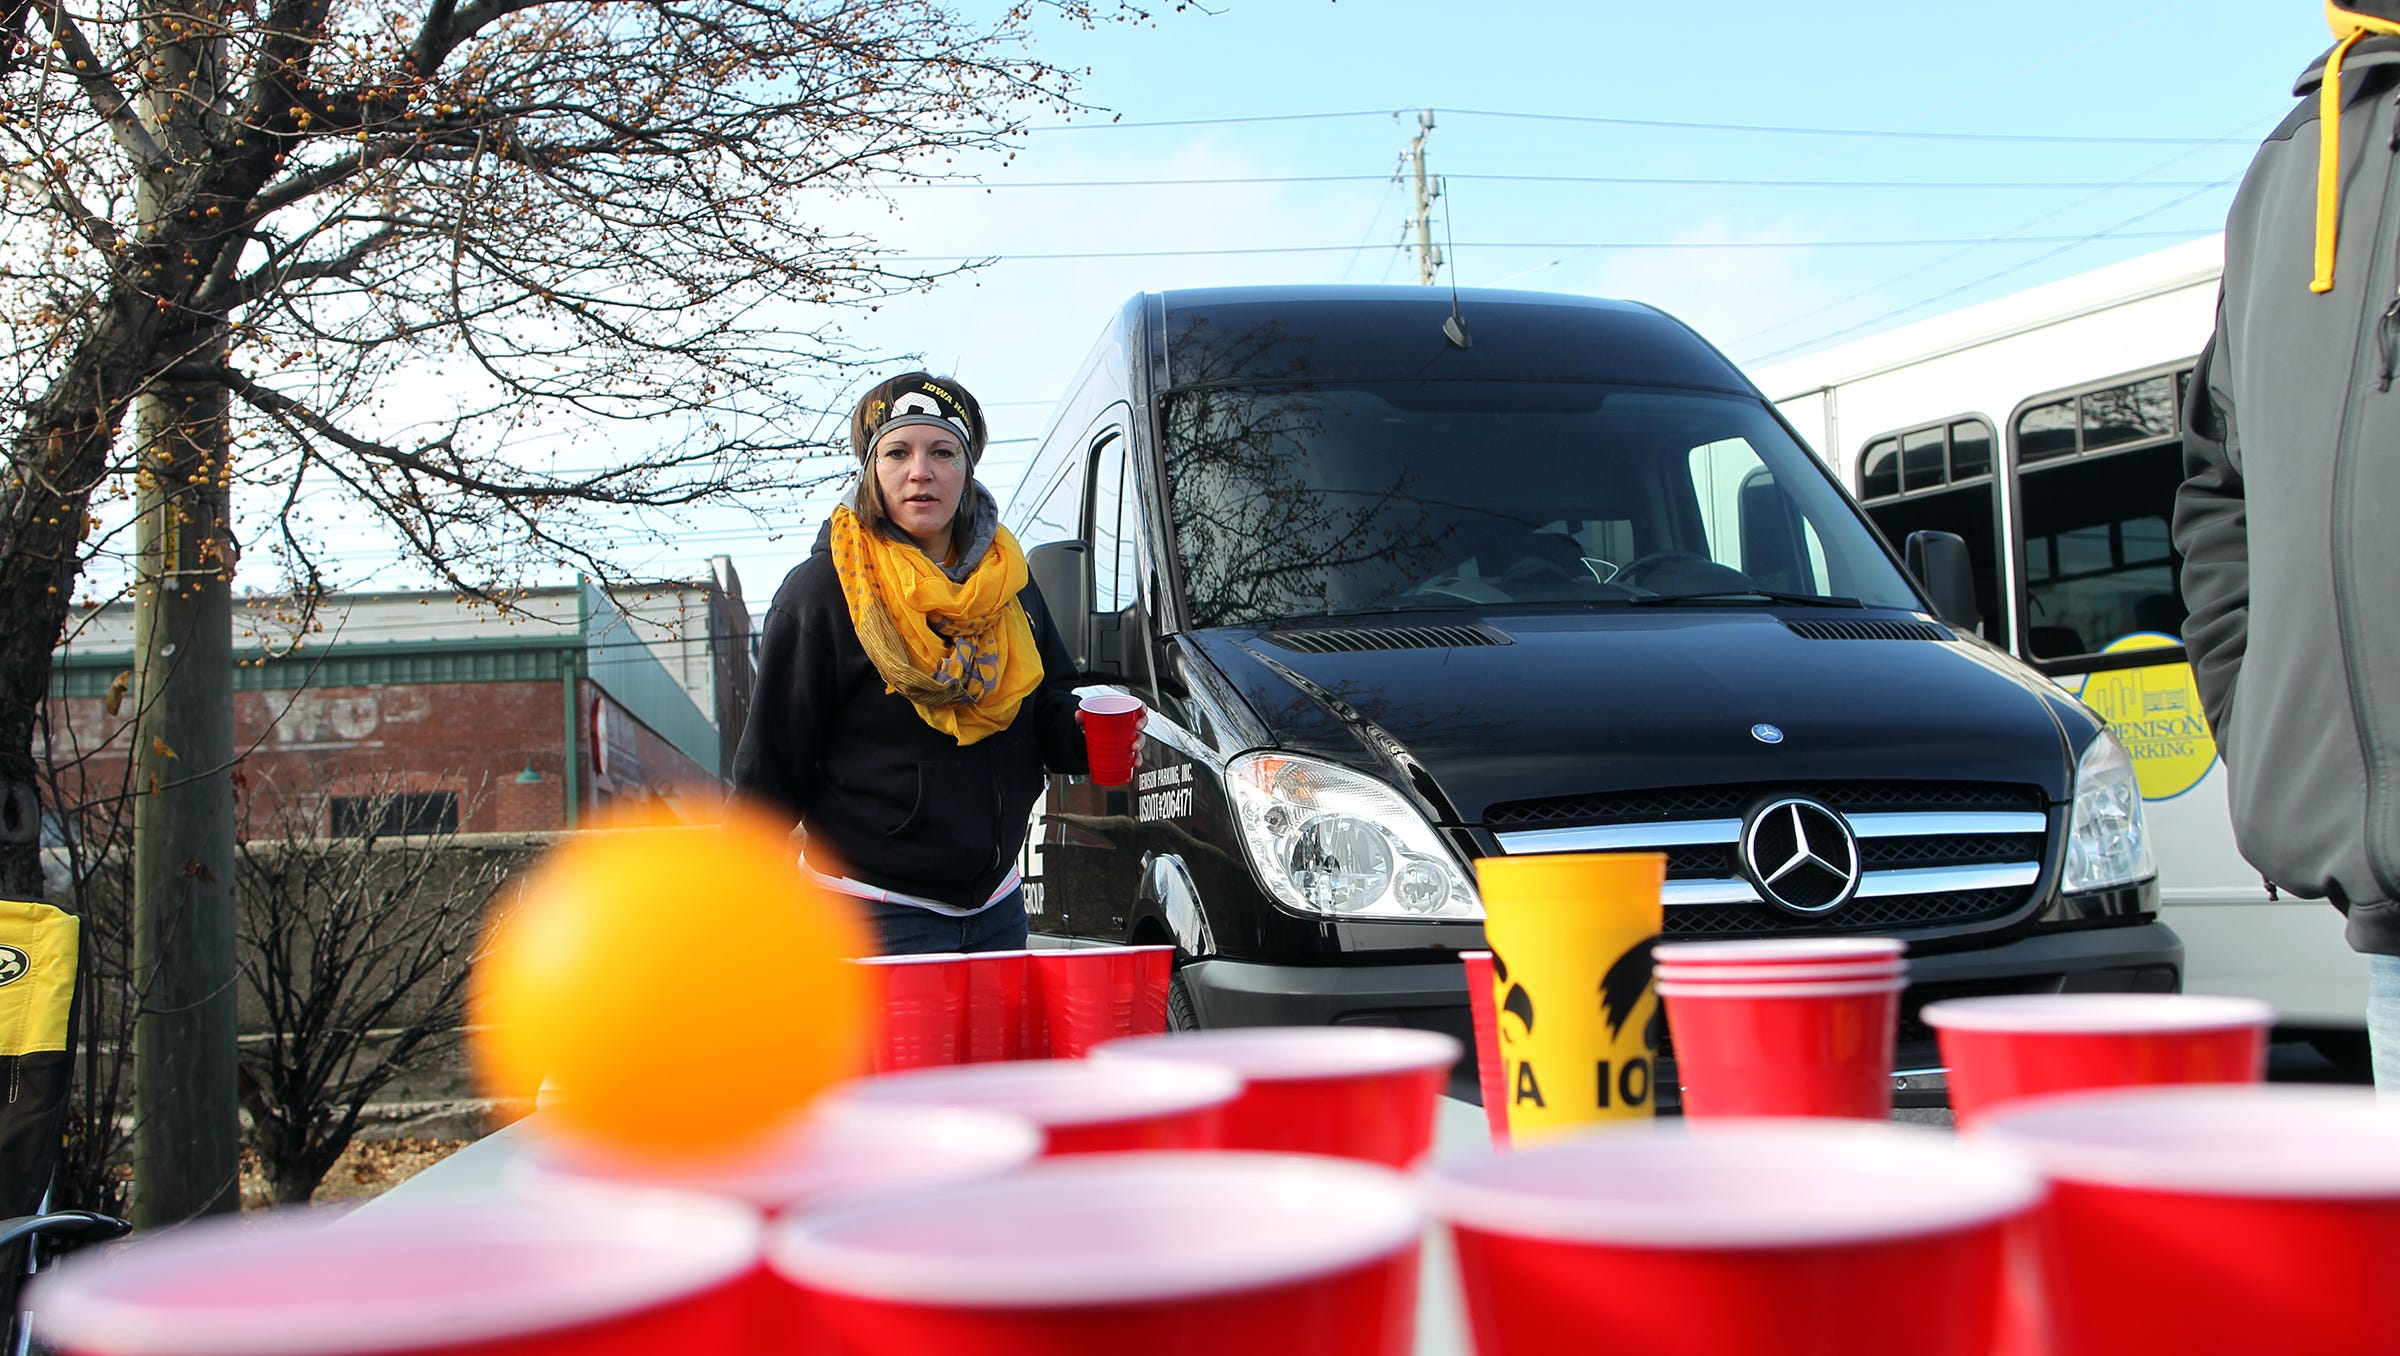 Samantha Pacha of Davenport plays beer pong with friends prior to the Hawkeyes' Big Ten Championship game against Michigan State at Lucas Oil Stadium in Indianapolis, Ind. on Saturday, Dec. 5, 2015.